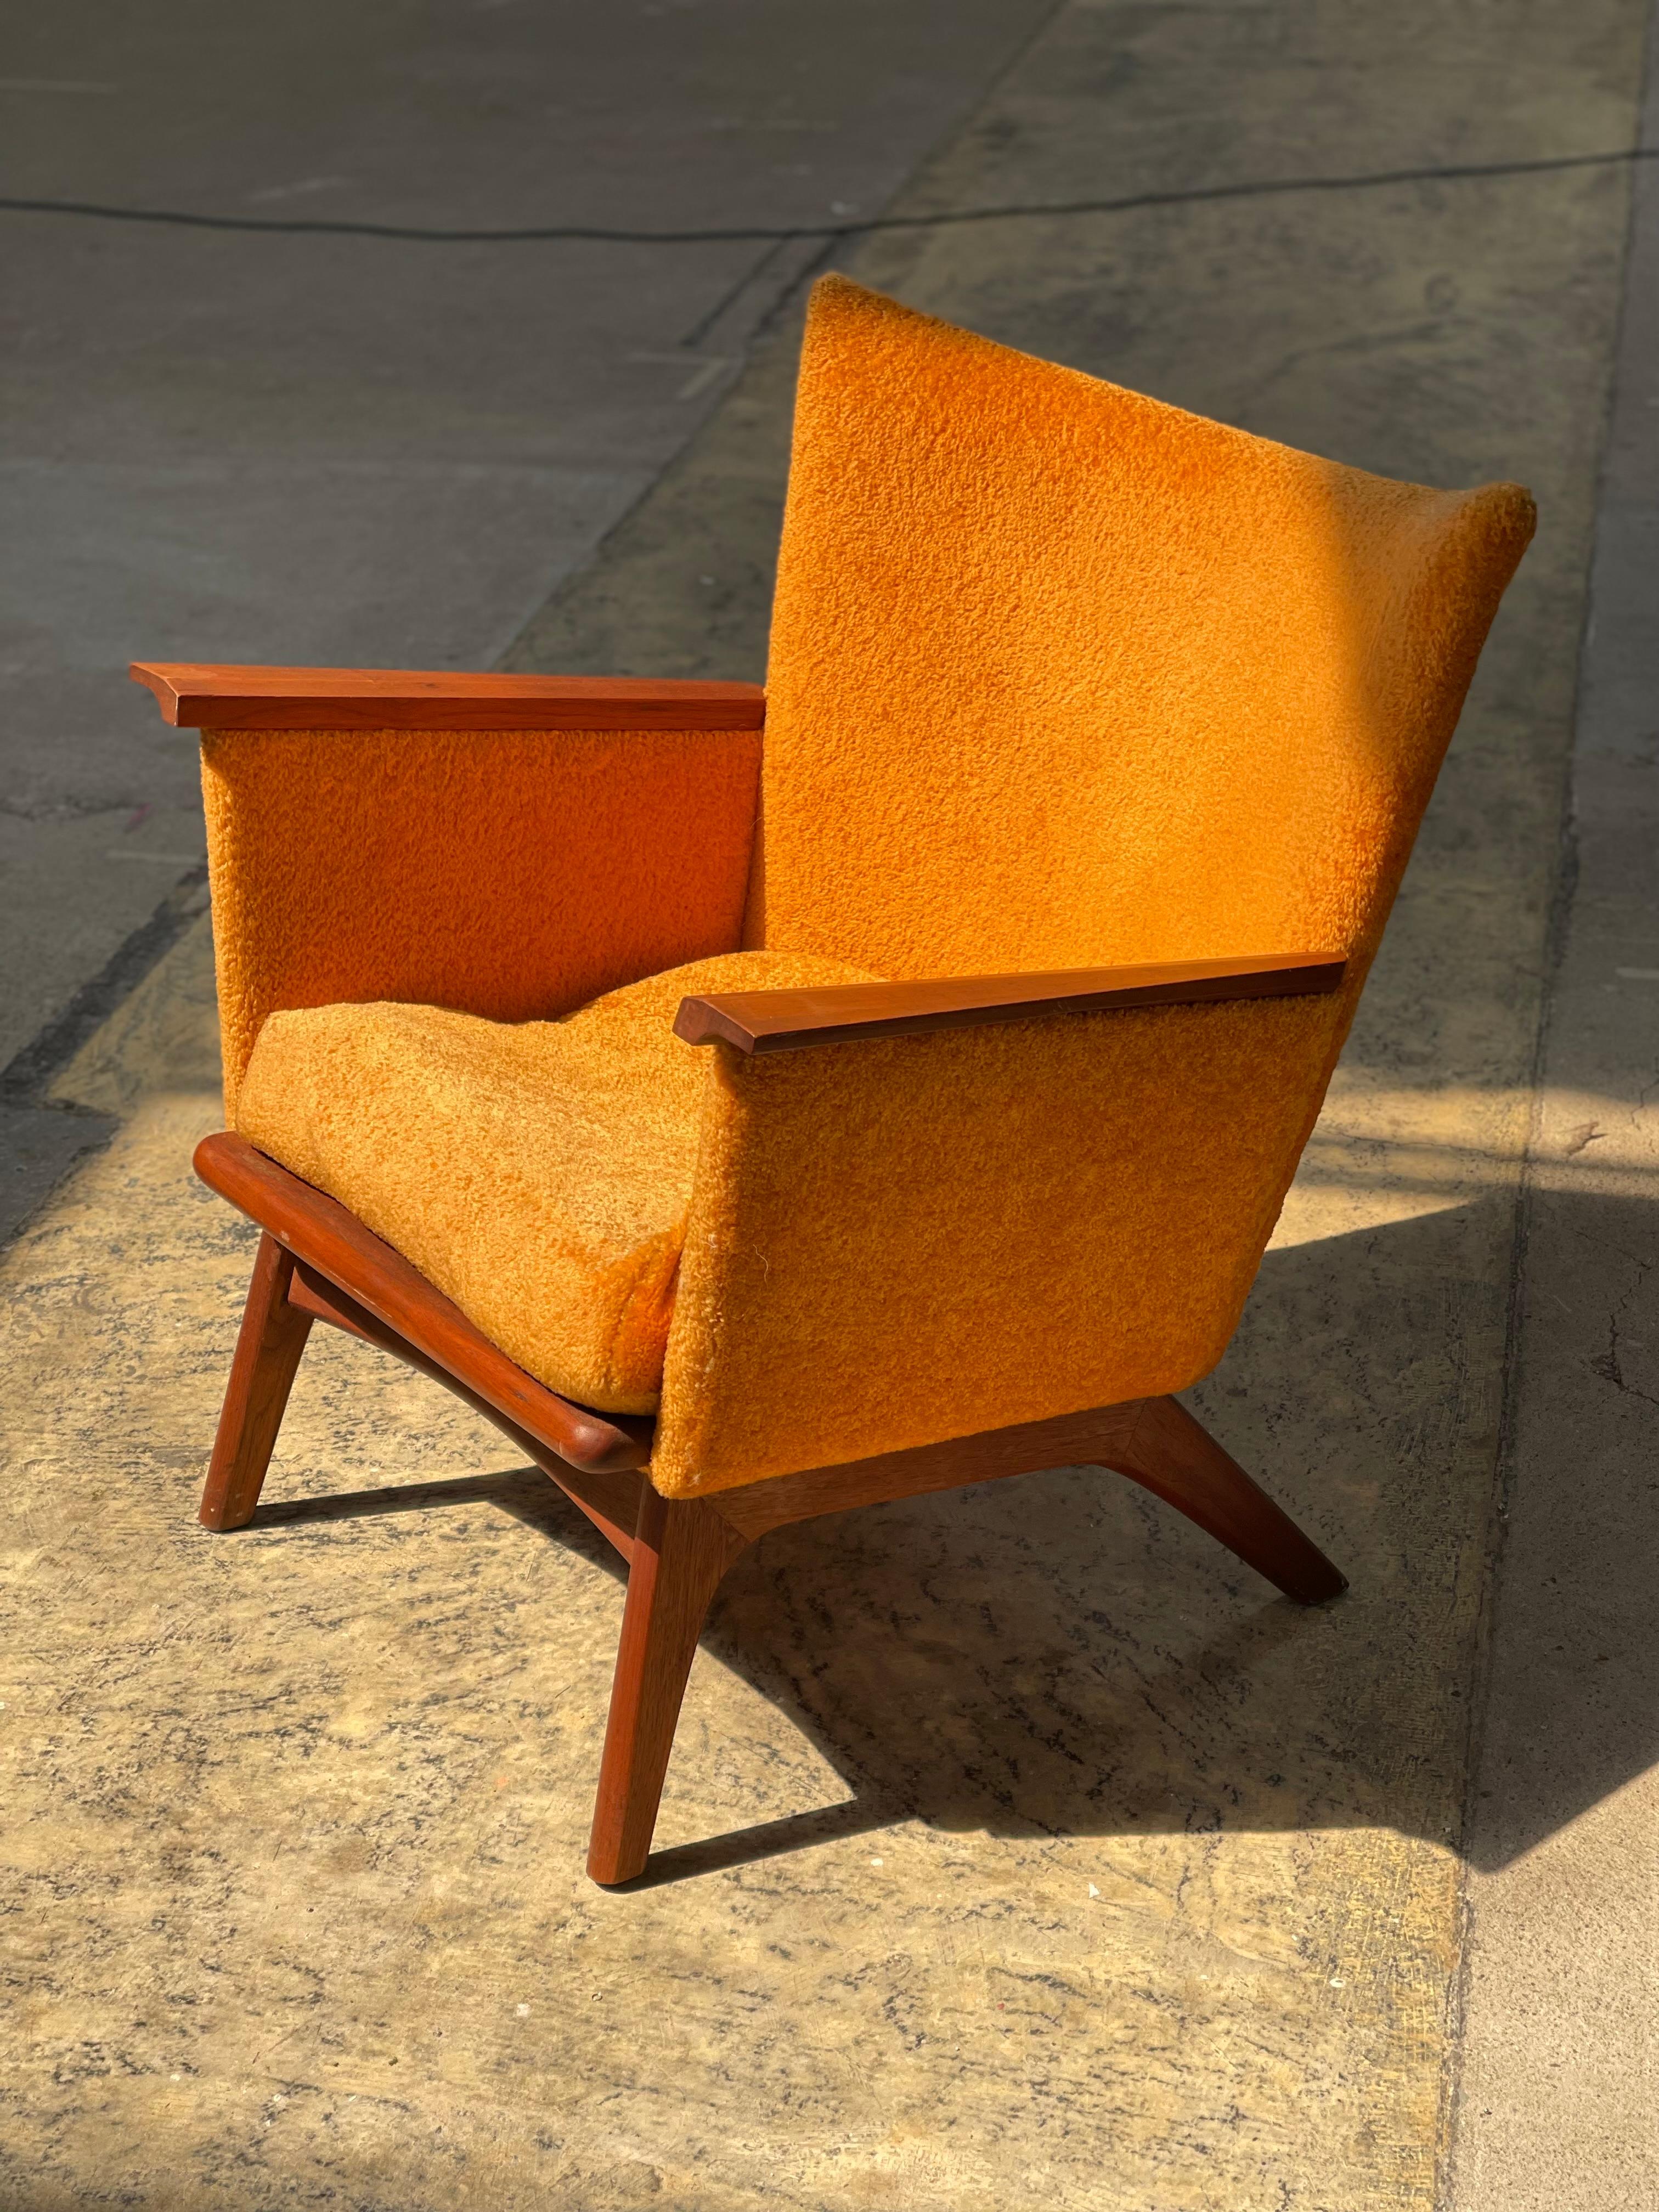 Late 20th Century Mid-Century Modern Adrian Pearsall Arm Chair For Sale